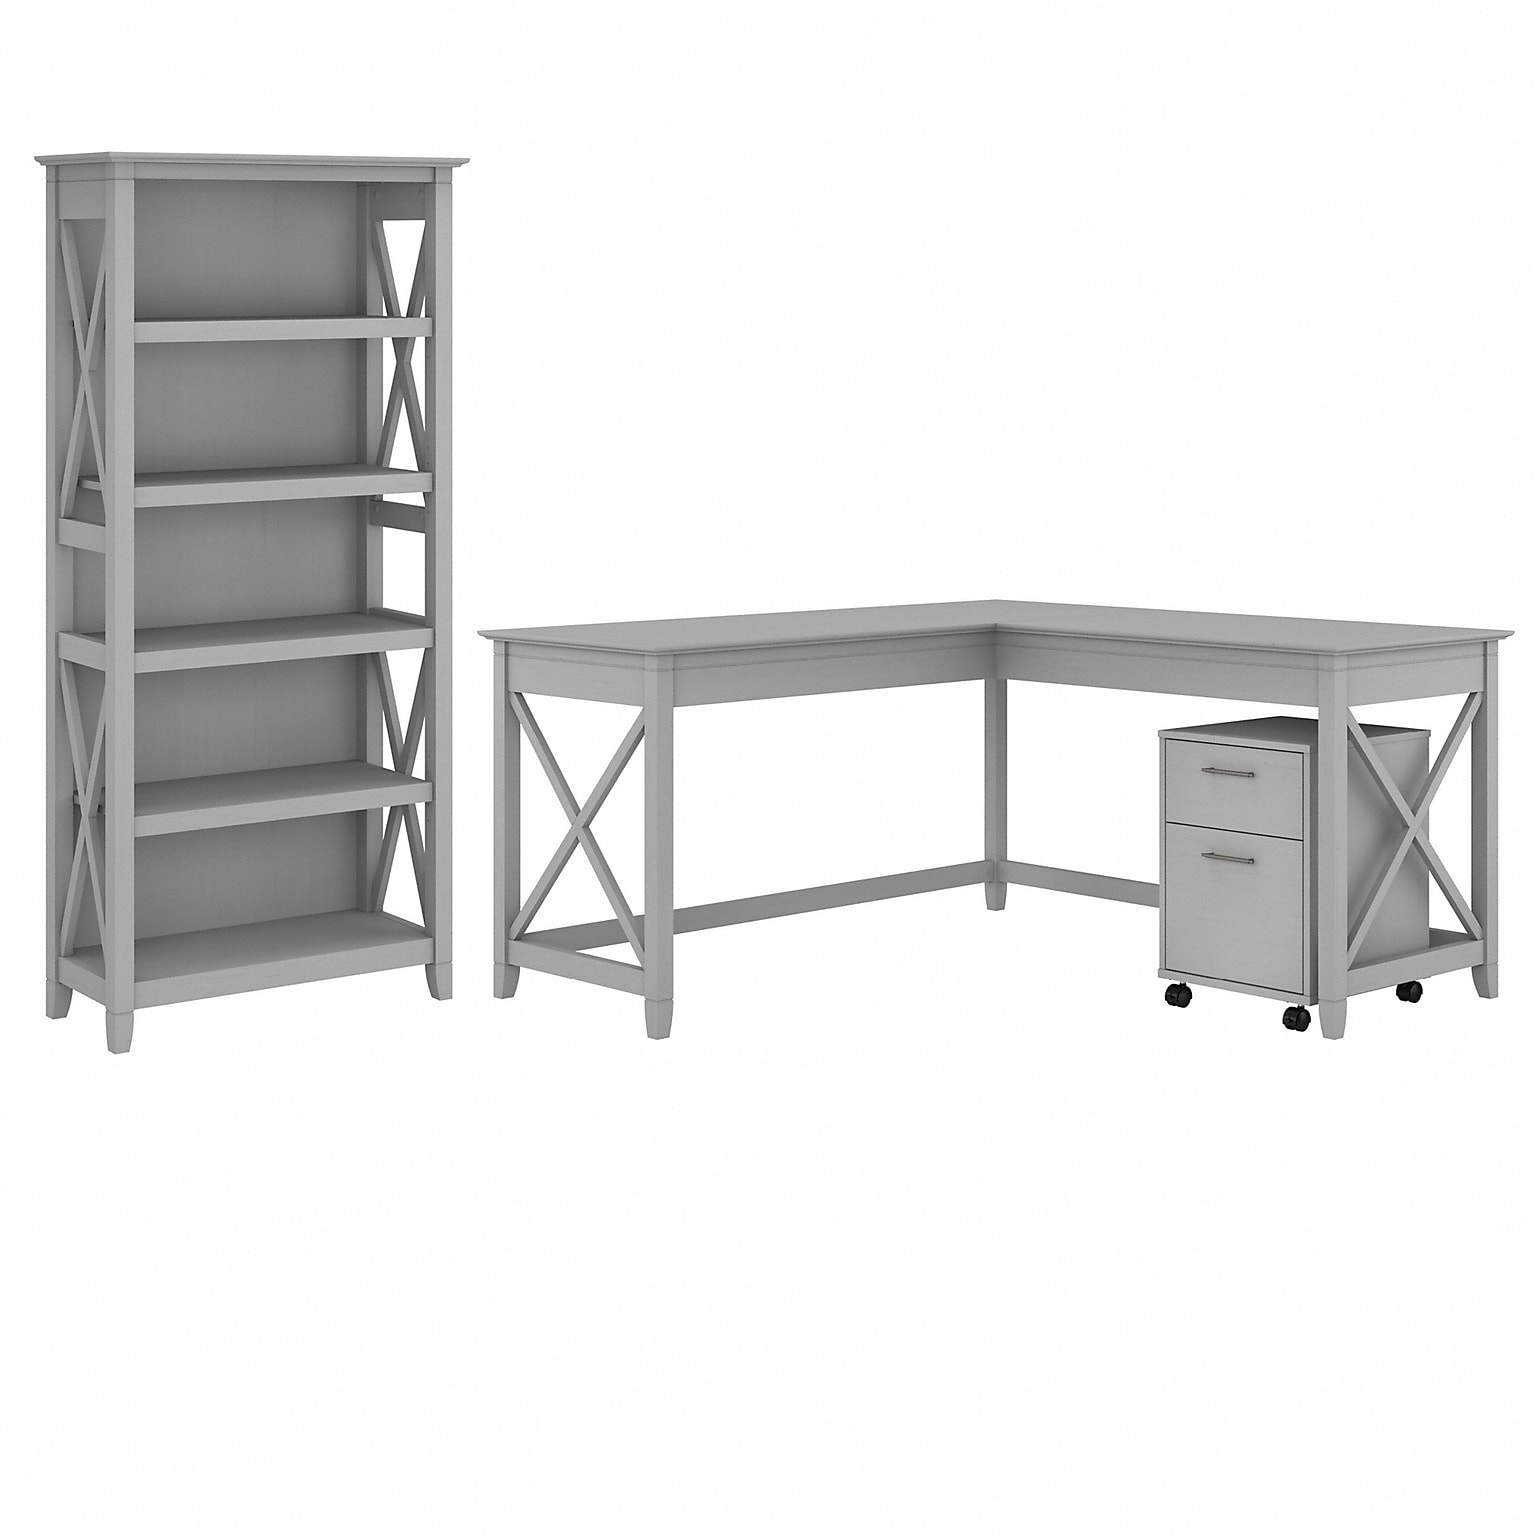 Bush Furniture Key West 60W L Shaped Desk with 2 Drawer Mobile File Cabinet and 5 Shelf Bookcase, Cape Cod Gray (KWS016CG)